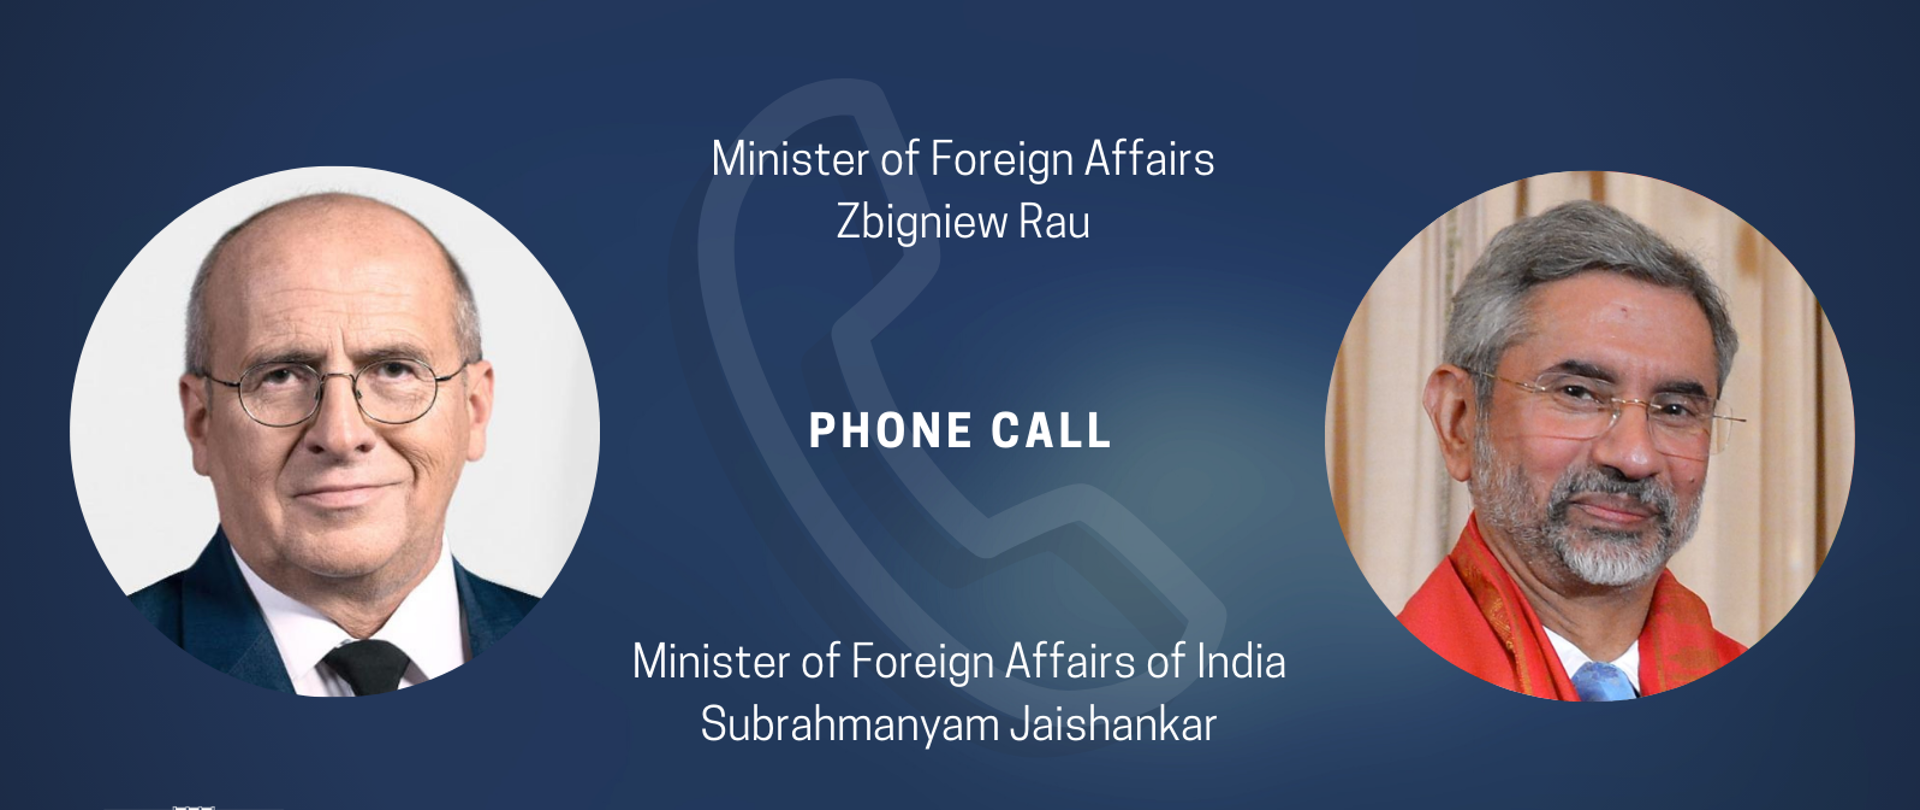 Phone call between foreign ministers of Poland and India